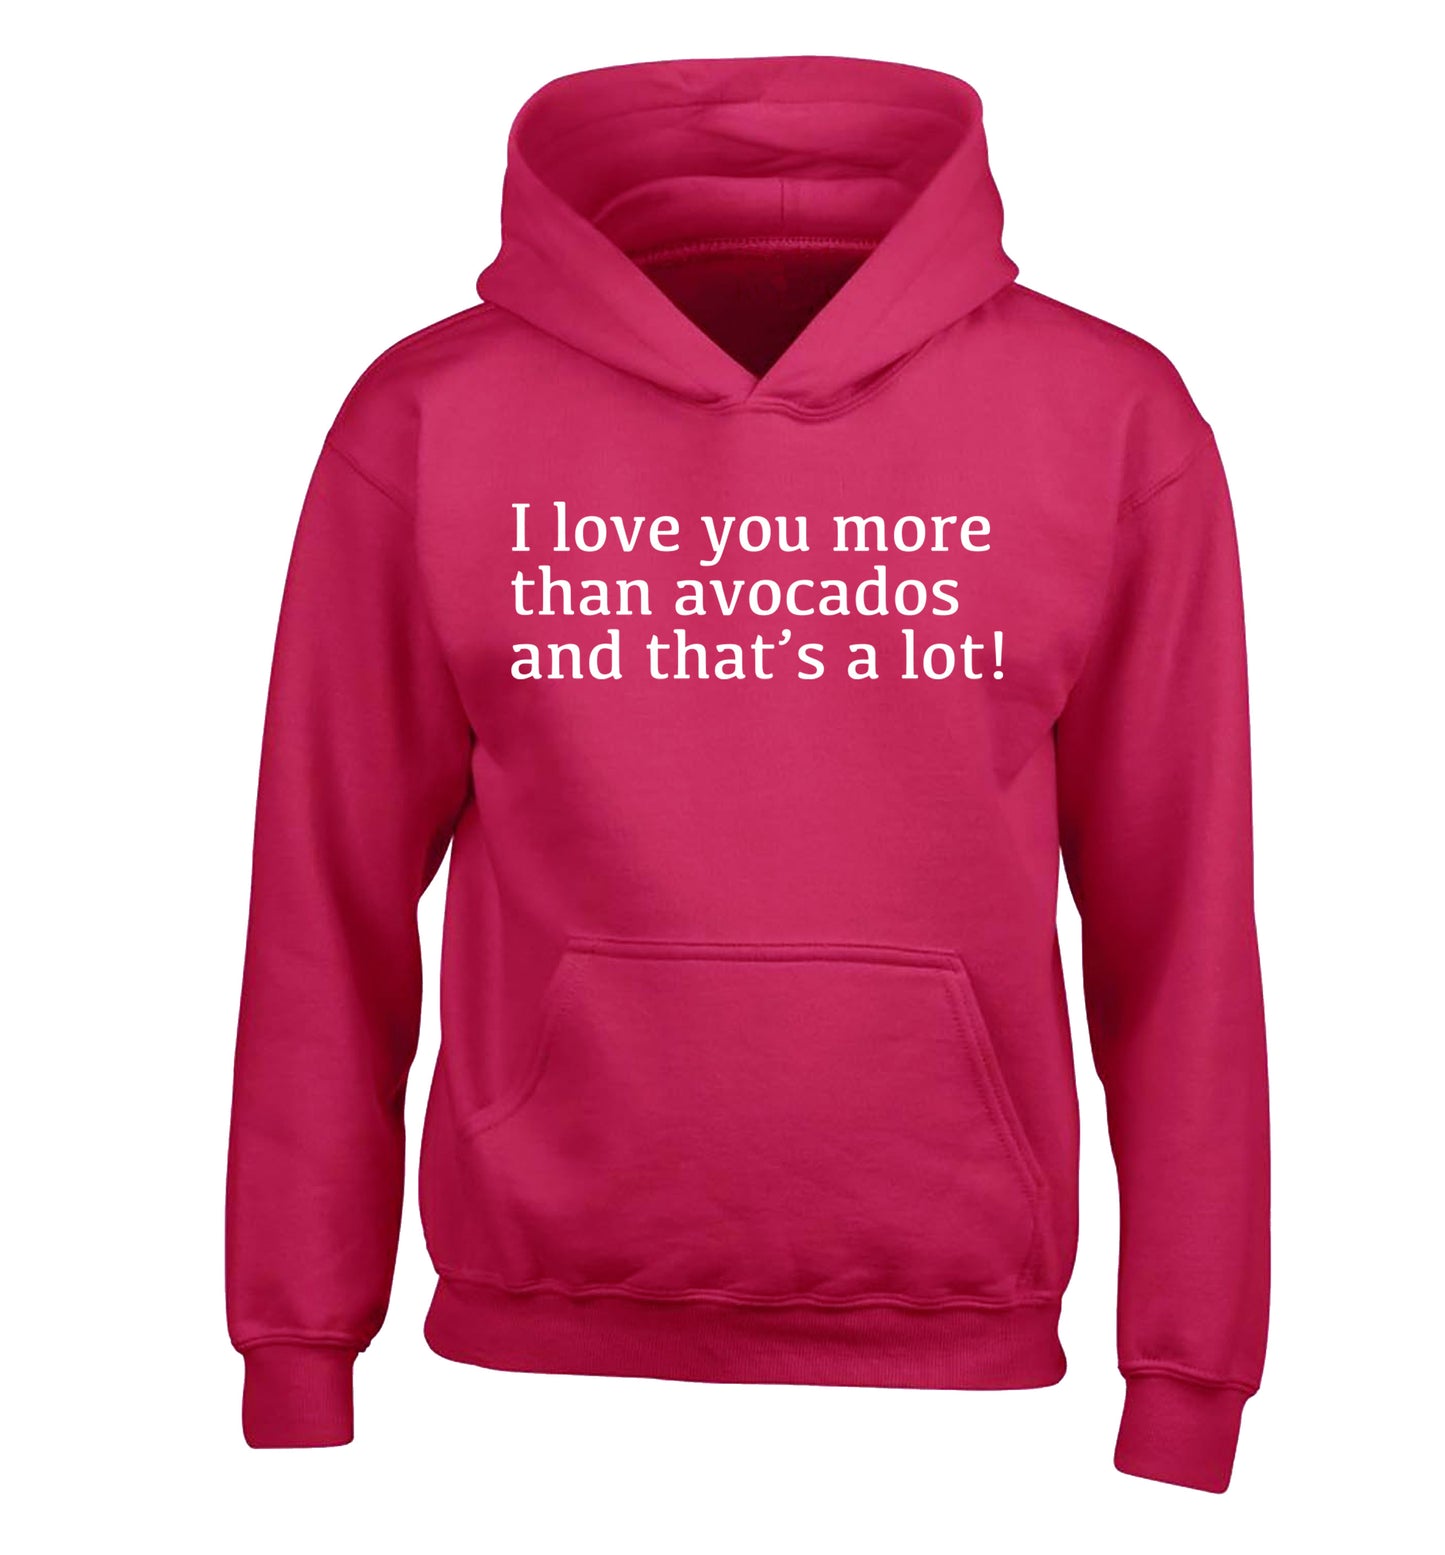 I love you more than avocados and that's a lot children's pink hoodie 12-14 Years